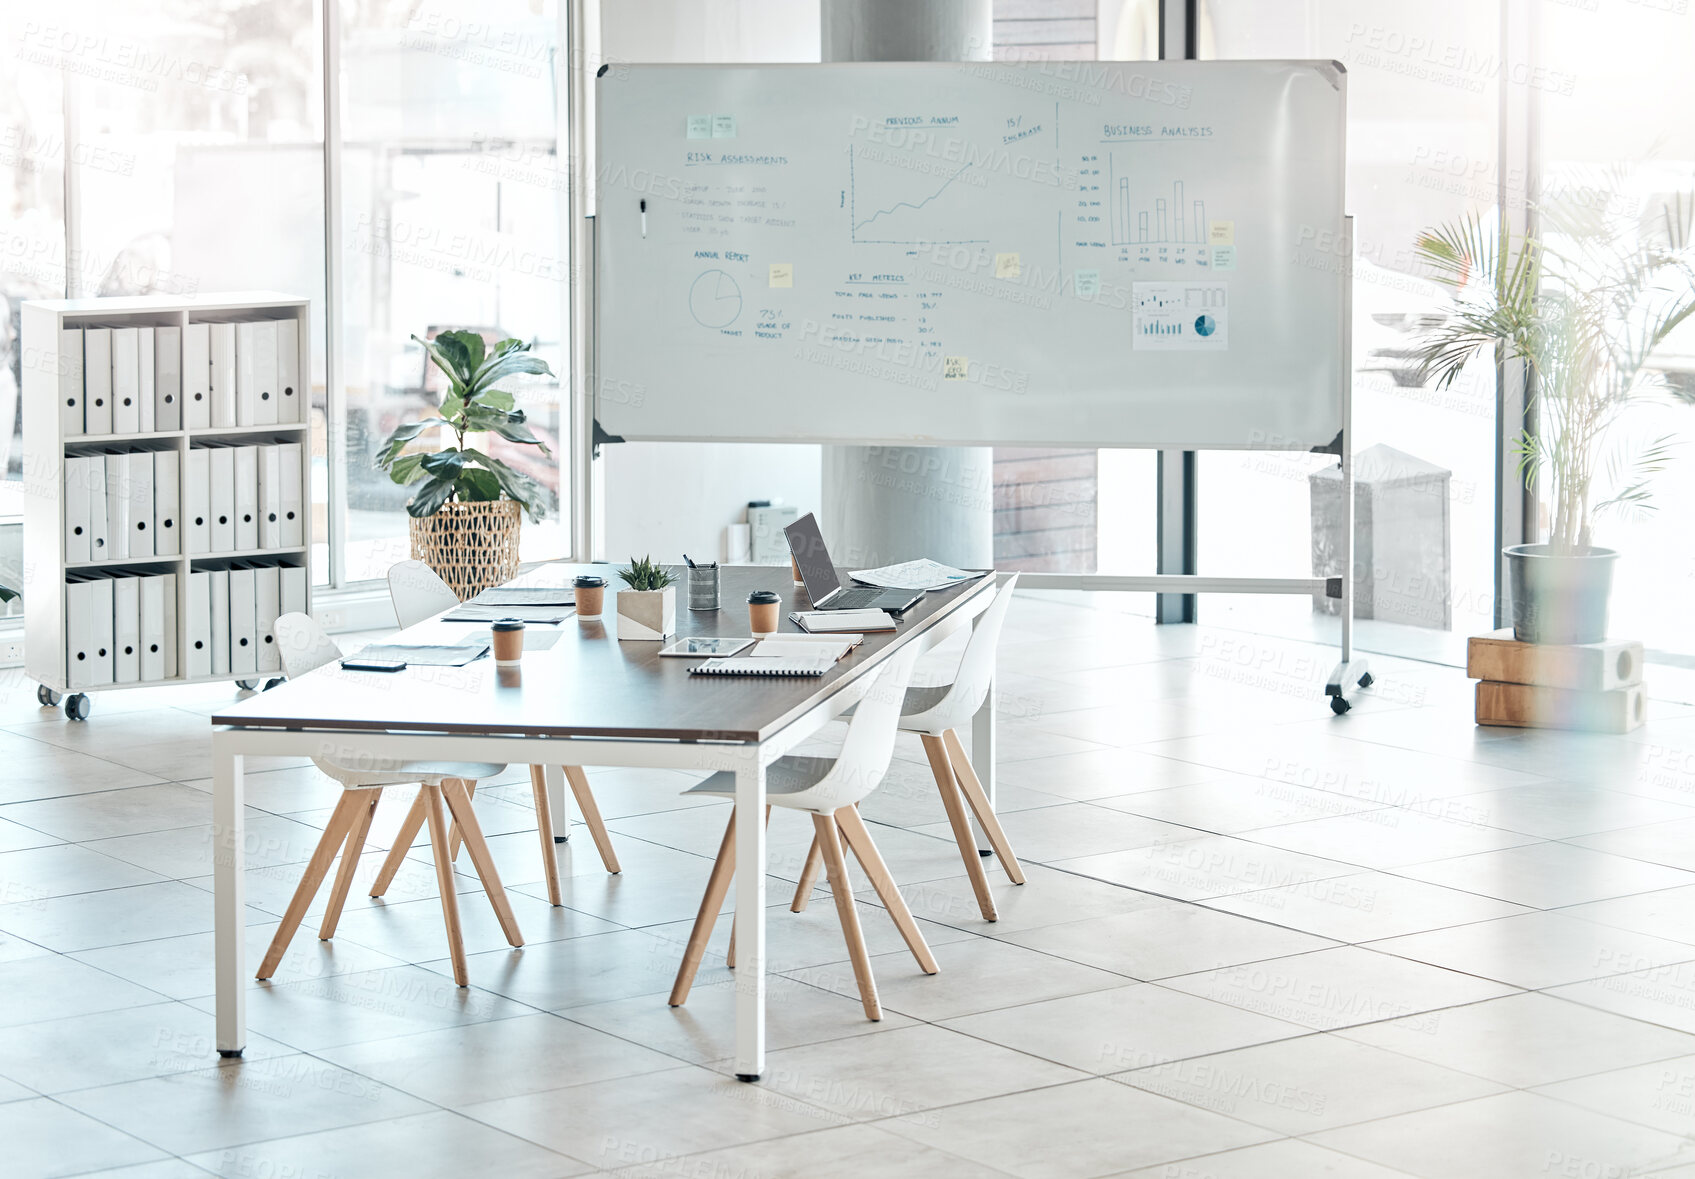 Buy stock photo Boardroom, meeting or empty conference room with whiteboard, chairs and table interior of modern creative office space. Marketing data and charts for a business presentation, discussion of briefing